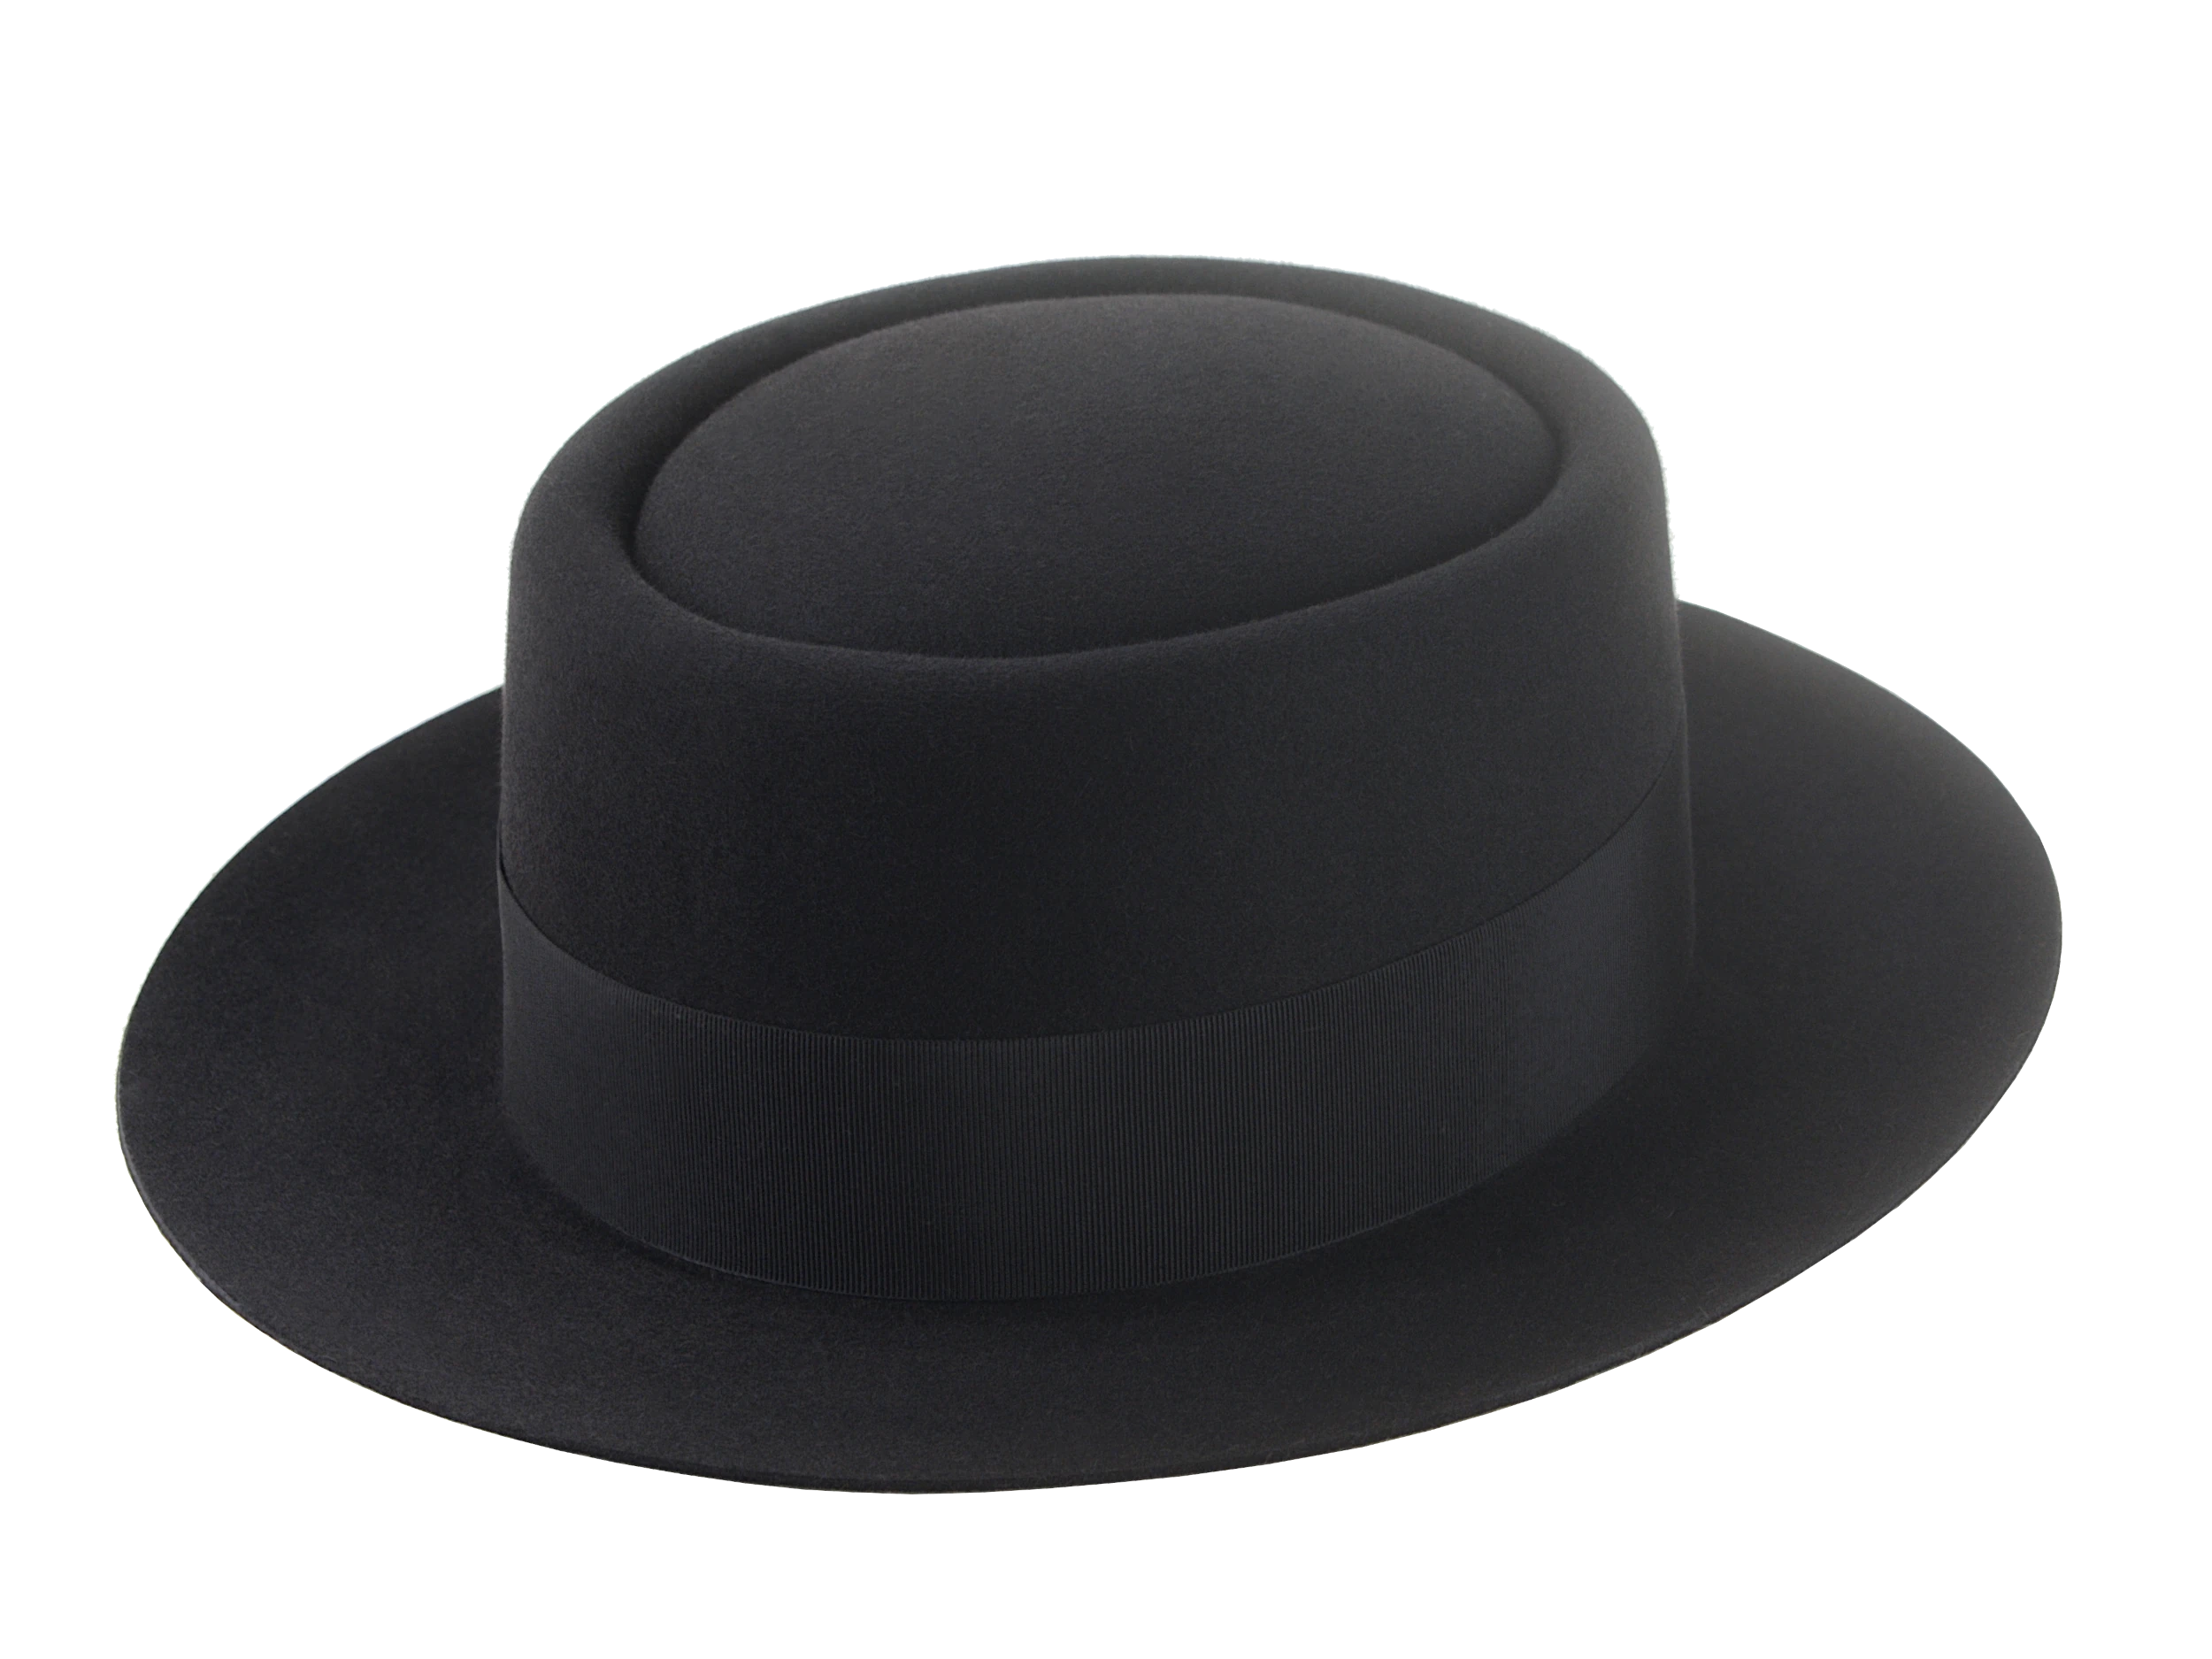 The Cosmo: Illustrating the sleek and refined overall look of the hat | Agnoulita Hats